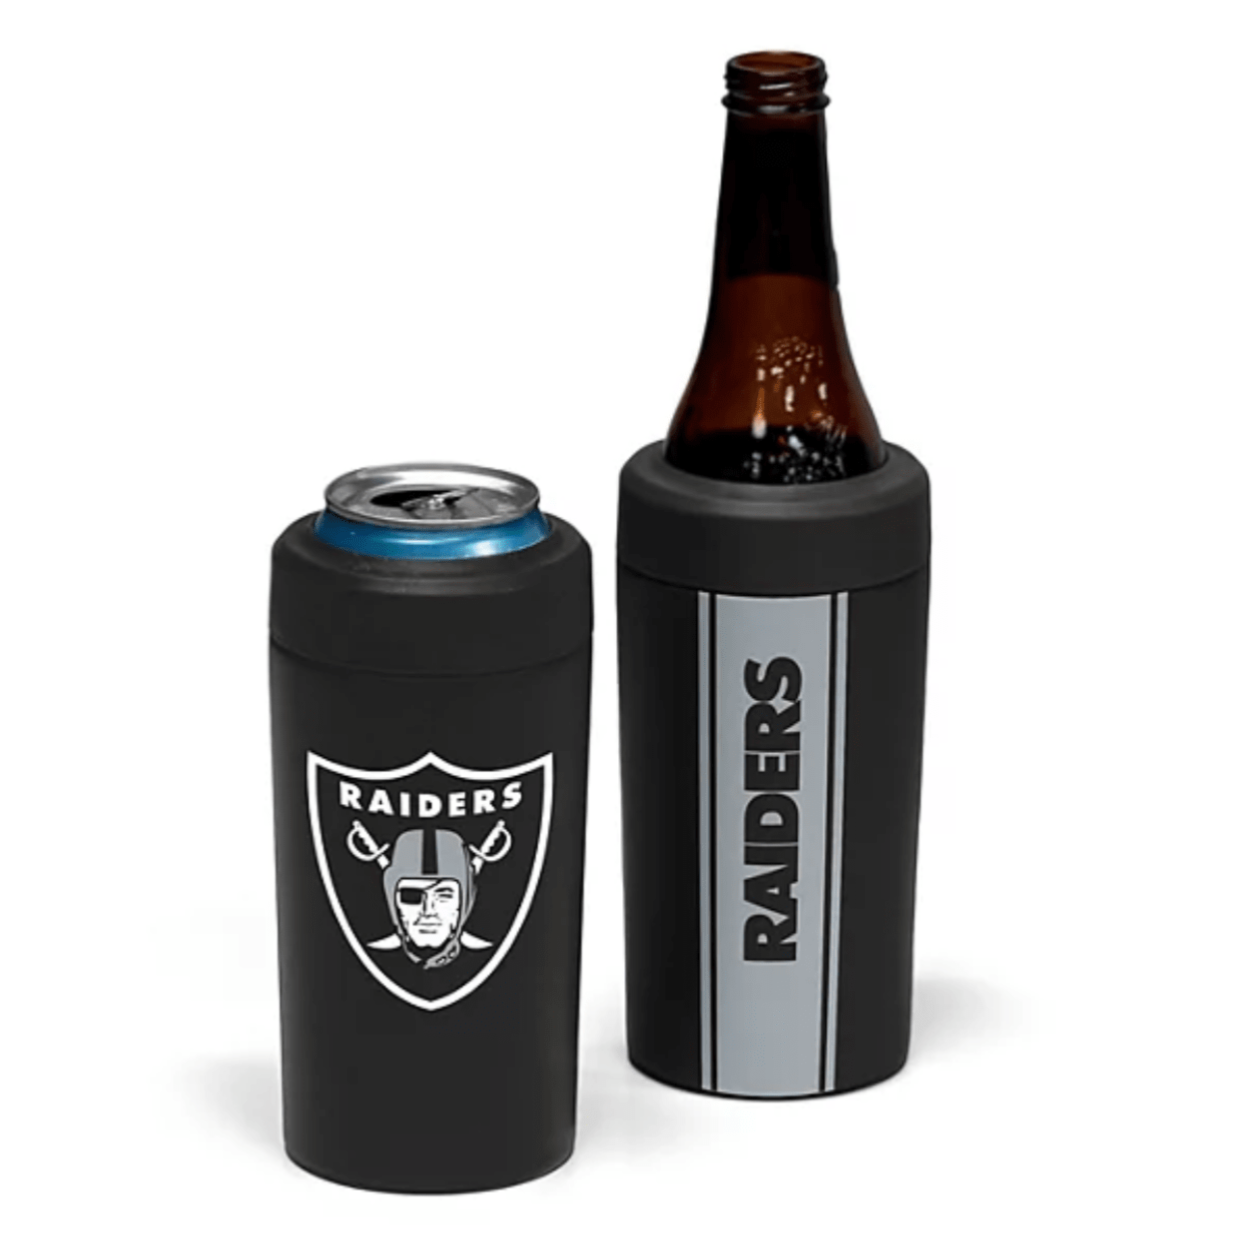 Frost Buddy 2.0 Can Cooler Fits ALL 12 and 16 Oz. Cans and Bottles,  Personalized, Laser Engraved, Select Your Team or School Logo 